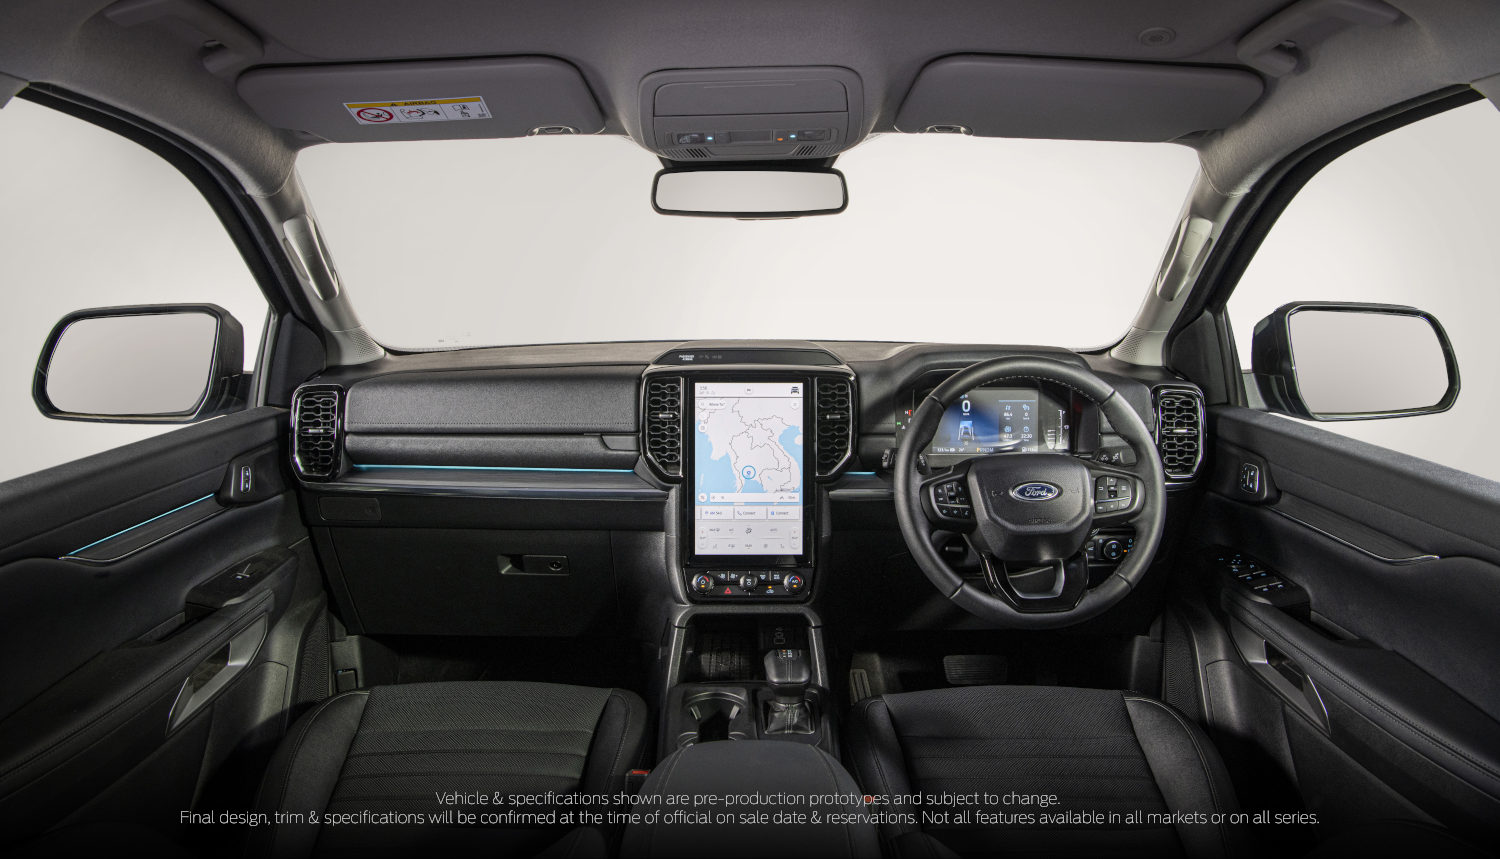 Inside the Ford Everest SUV